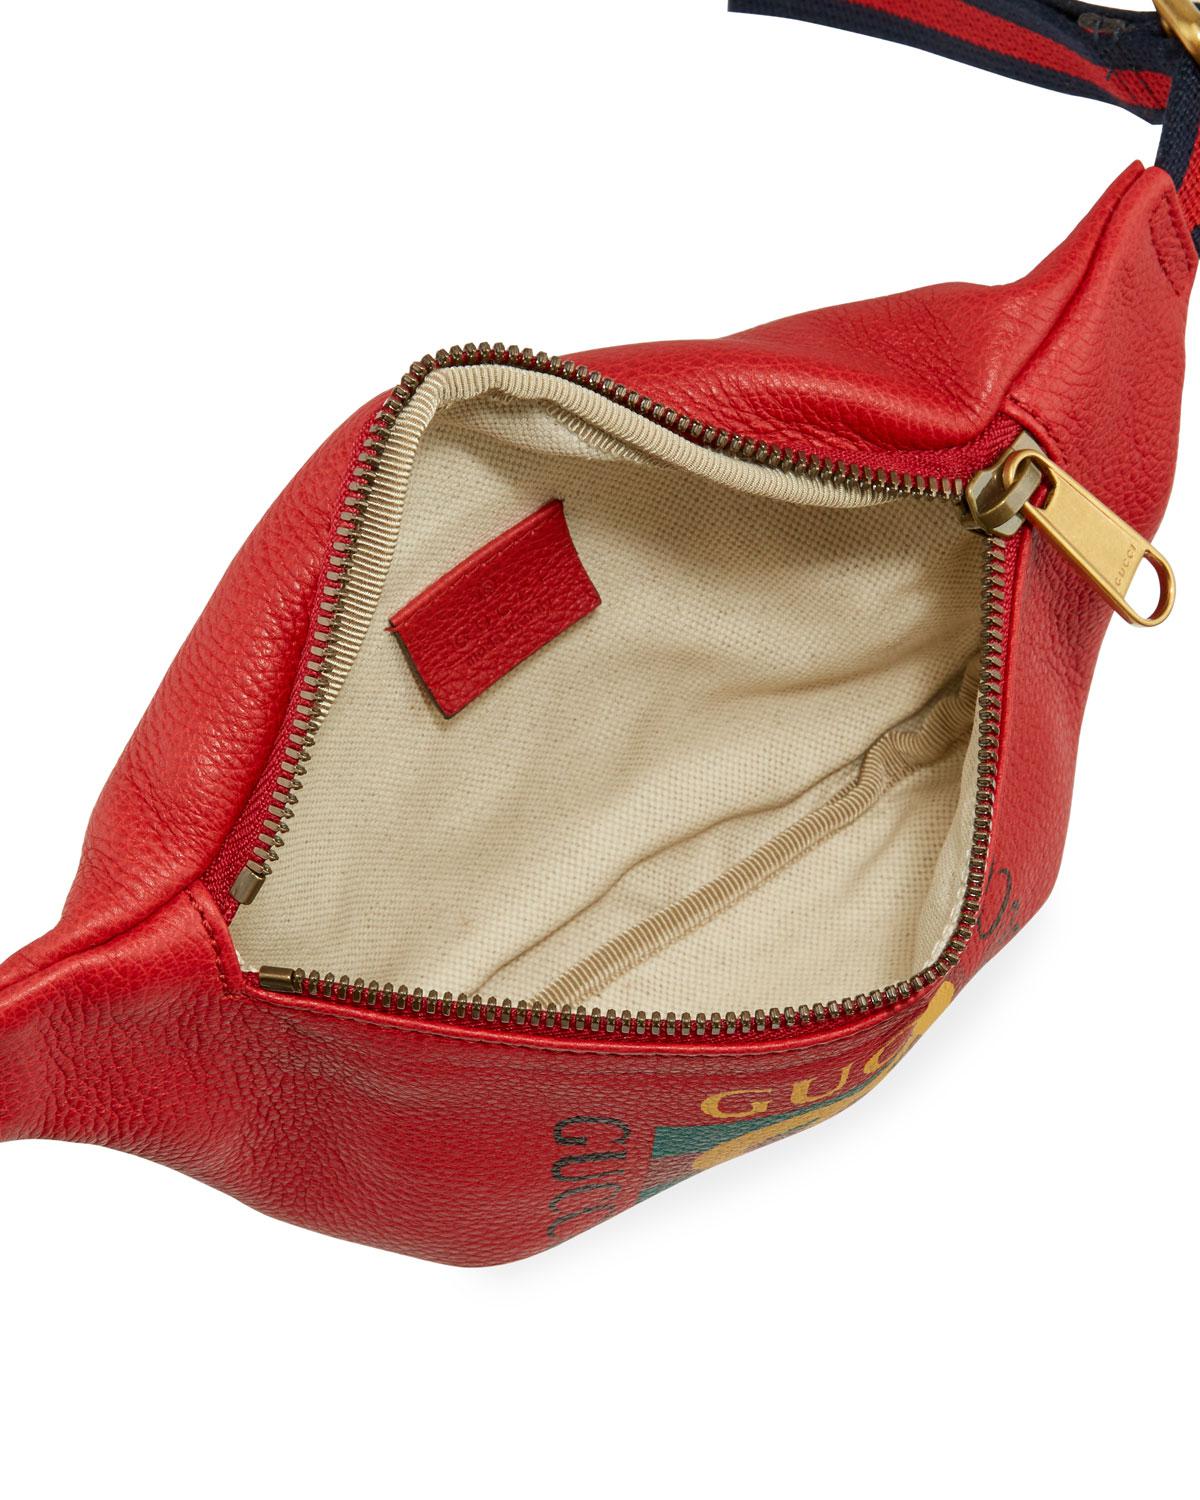 Gucci Men&#39;s Small Retro Leather Fanny Pack Belt Bag in Red - Lyst